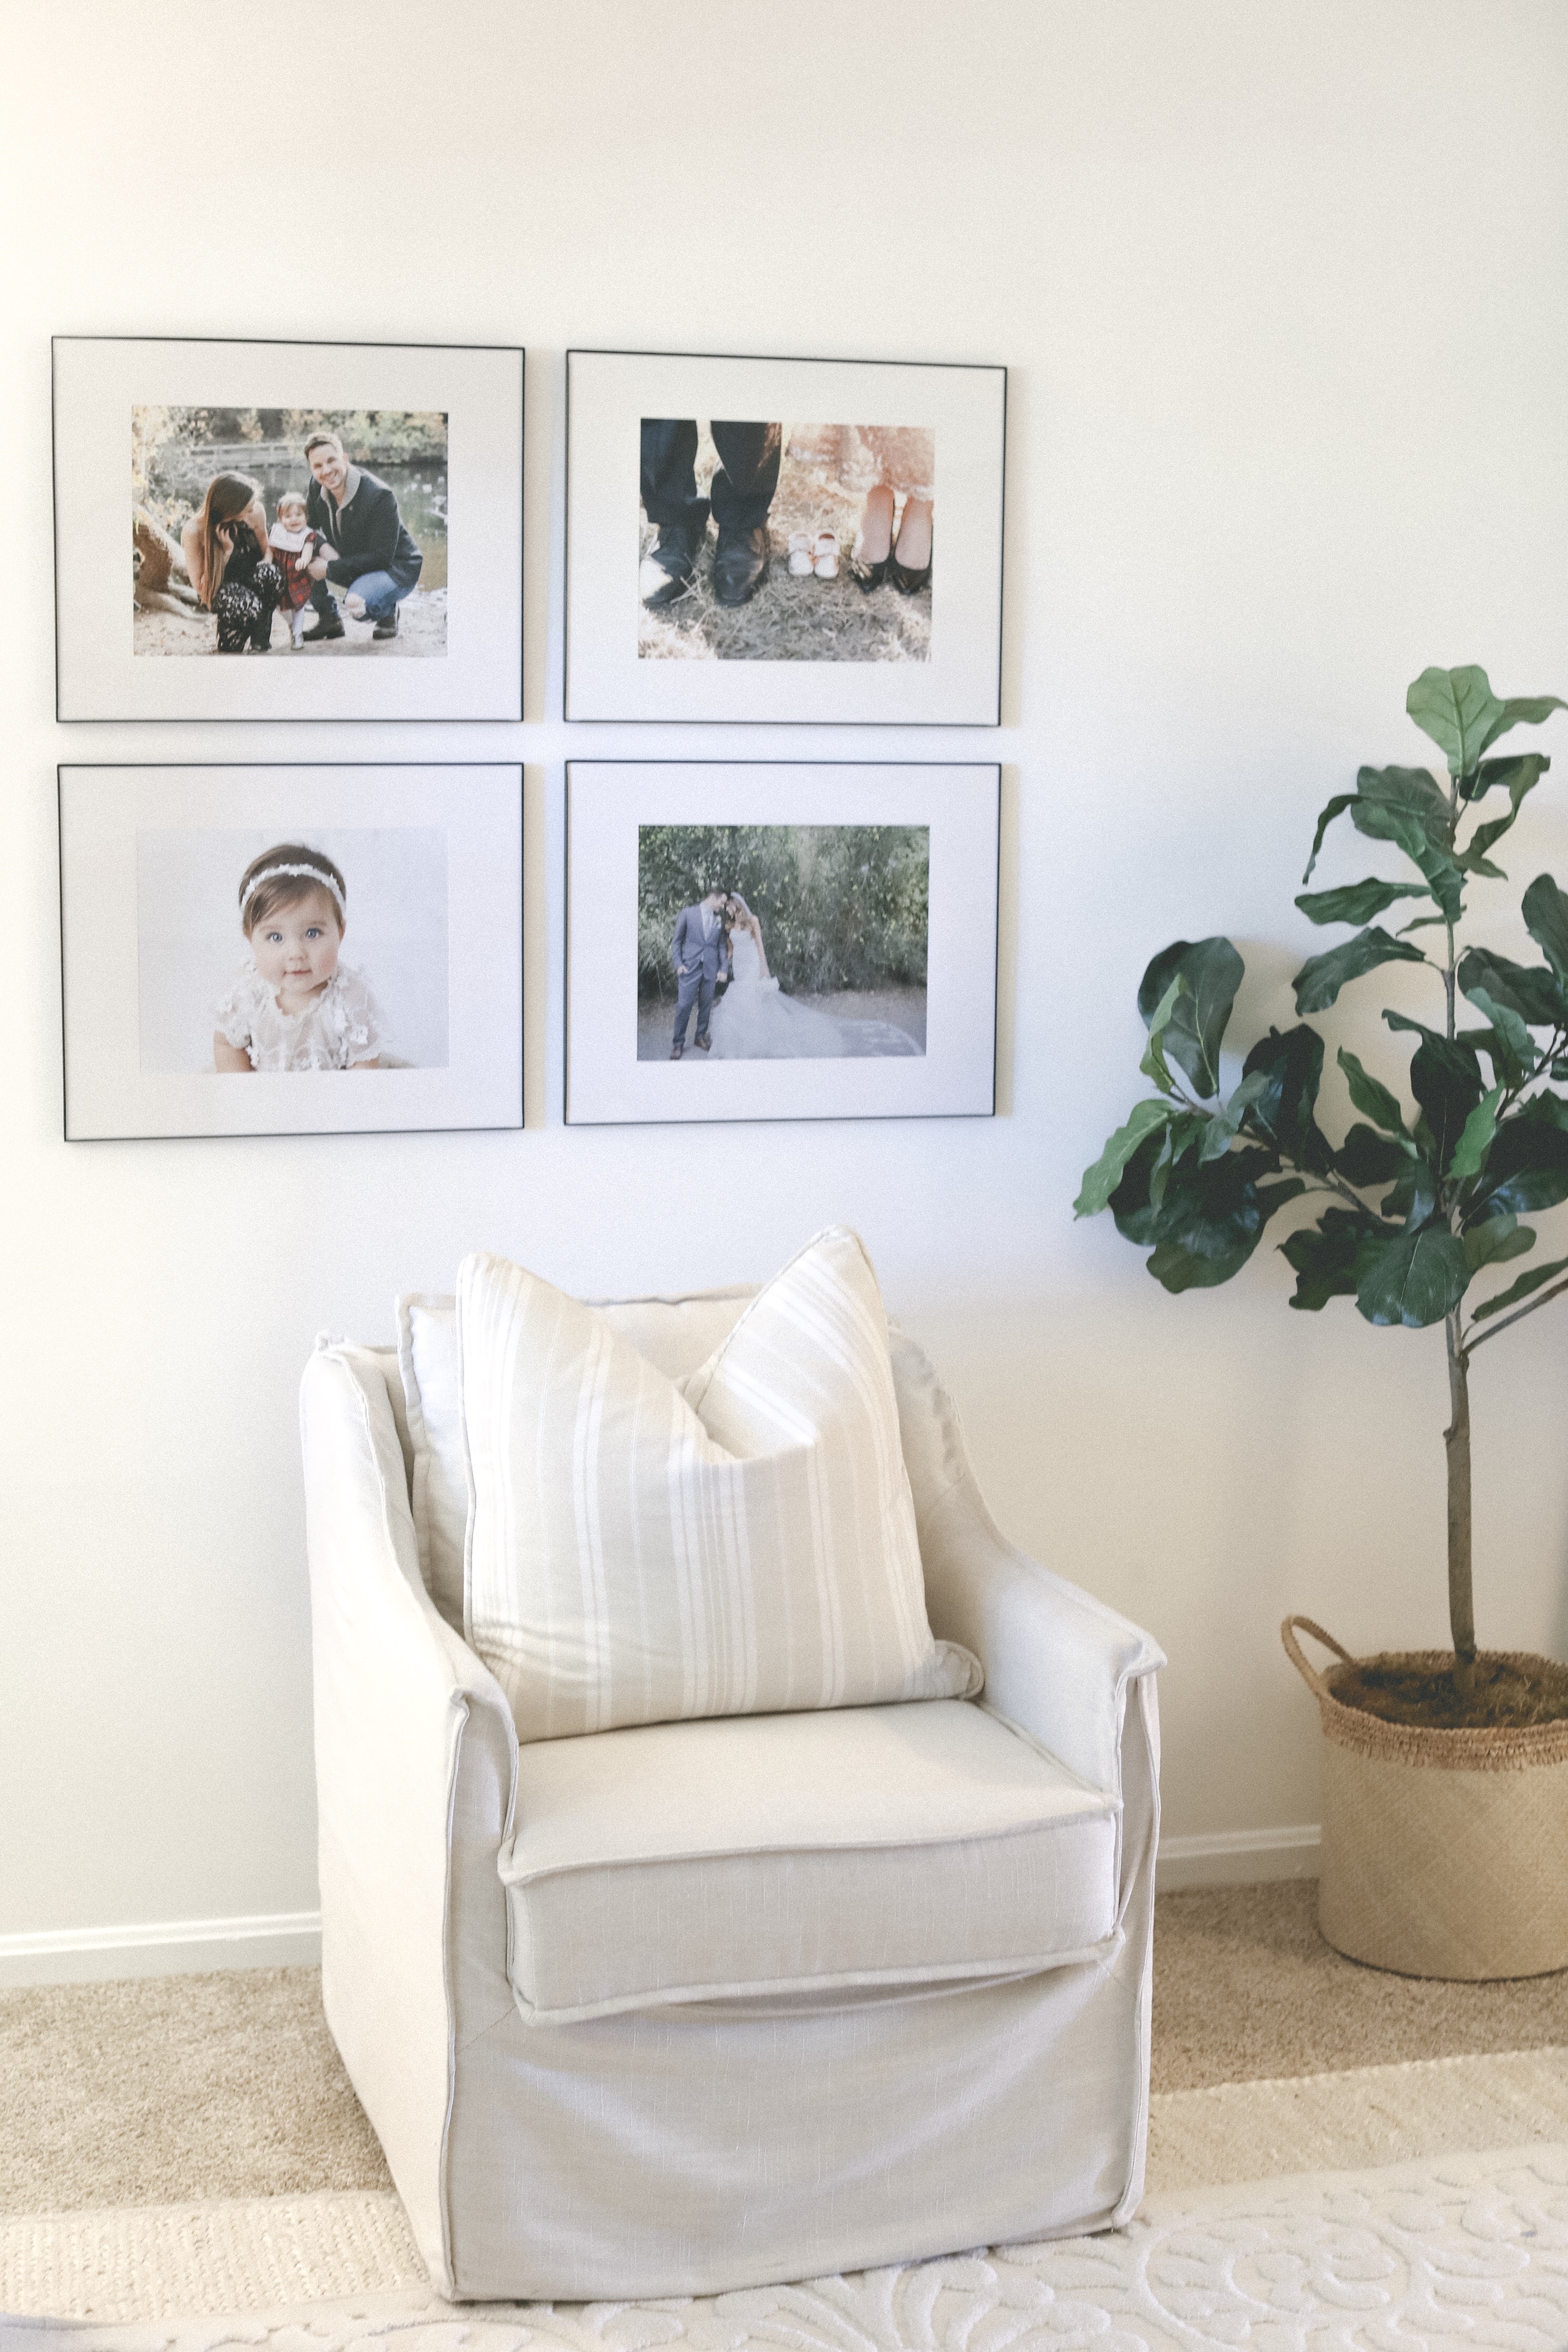 Townhouse Project: $60 Gallery Wall